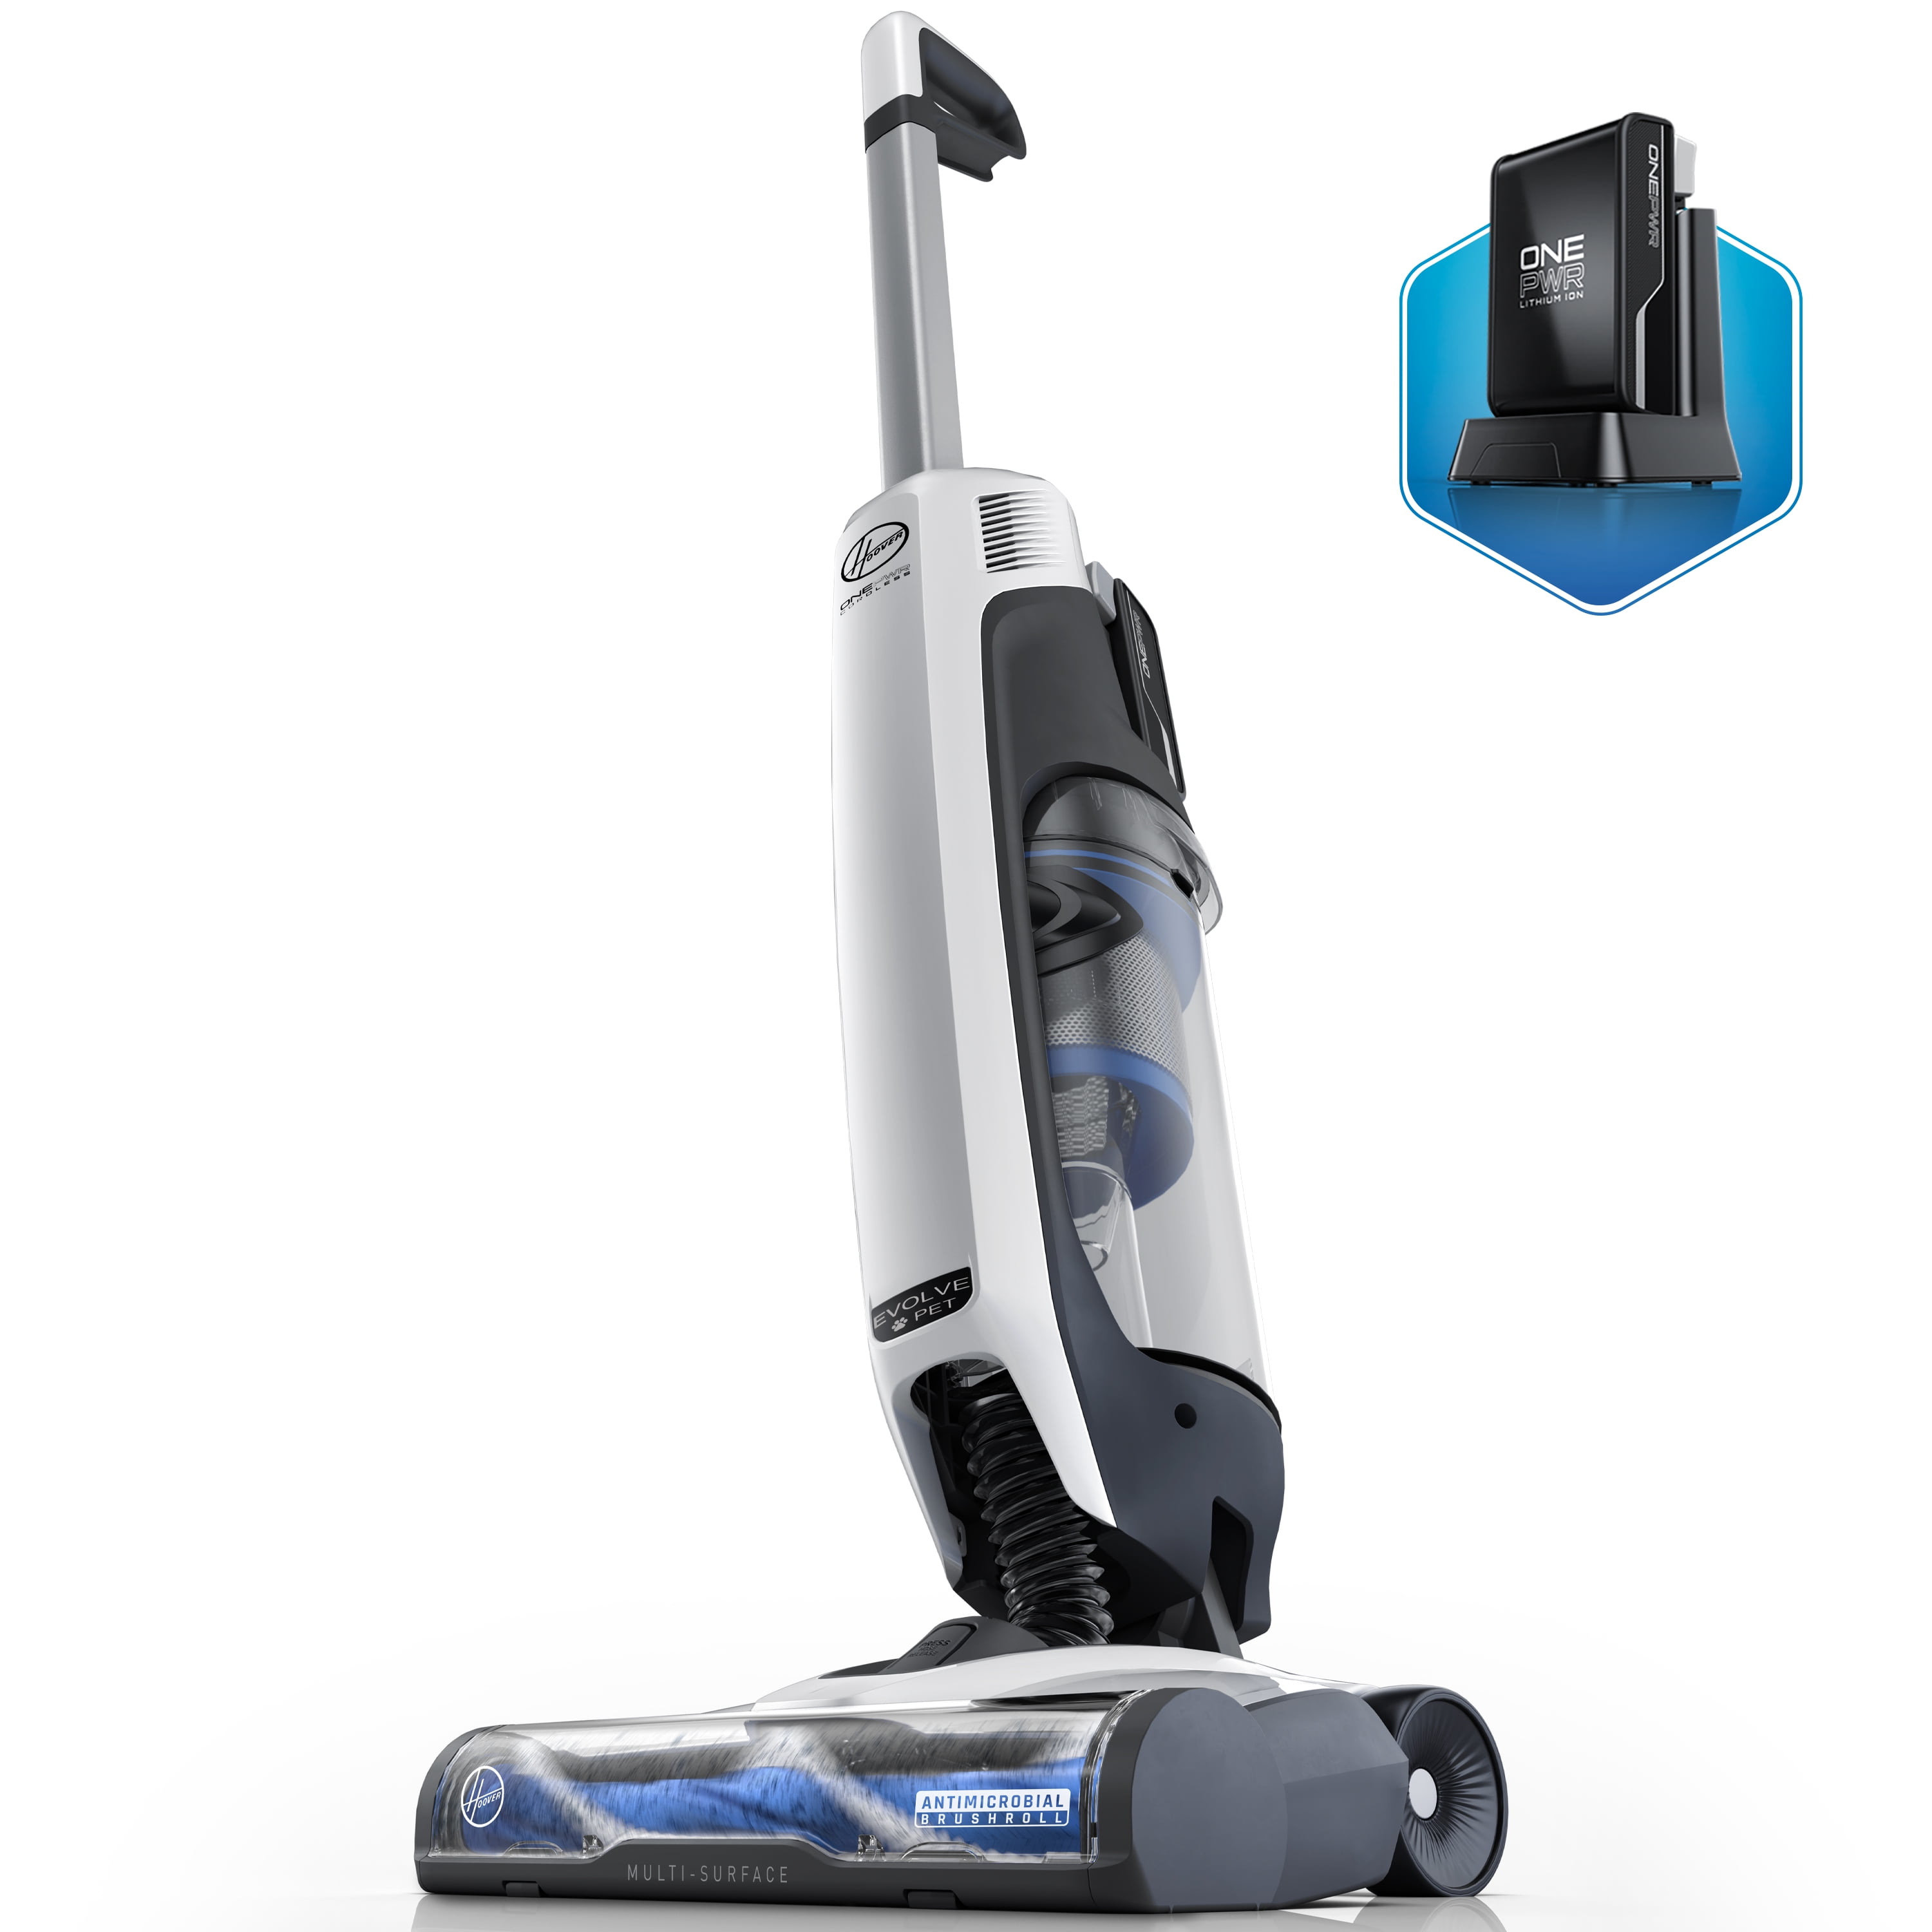 Hoover ONEPWR Evolve Pet Cordless Upright Vacuum Cleaner - Kit BH52420PC - Walmart.com